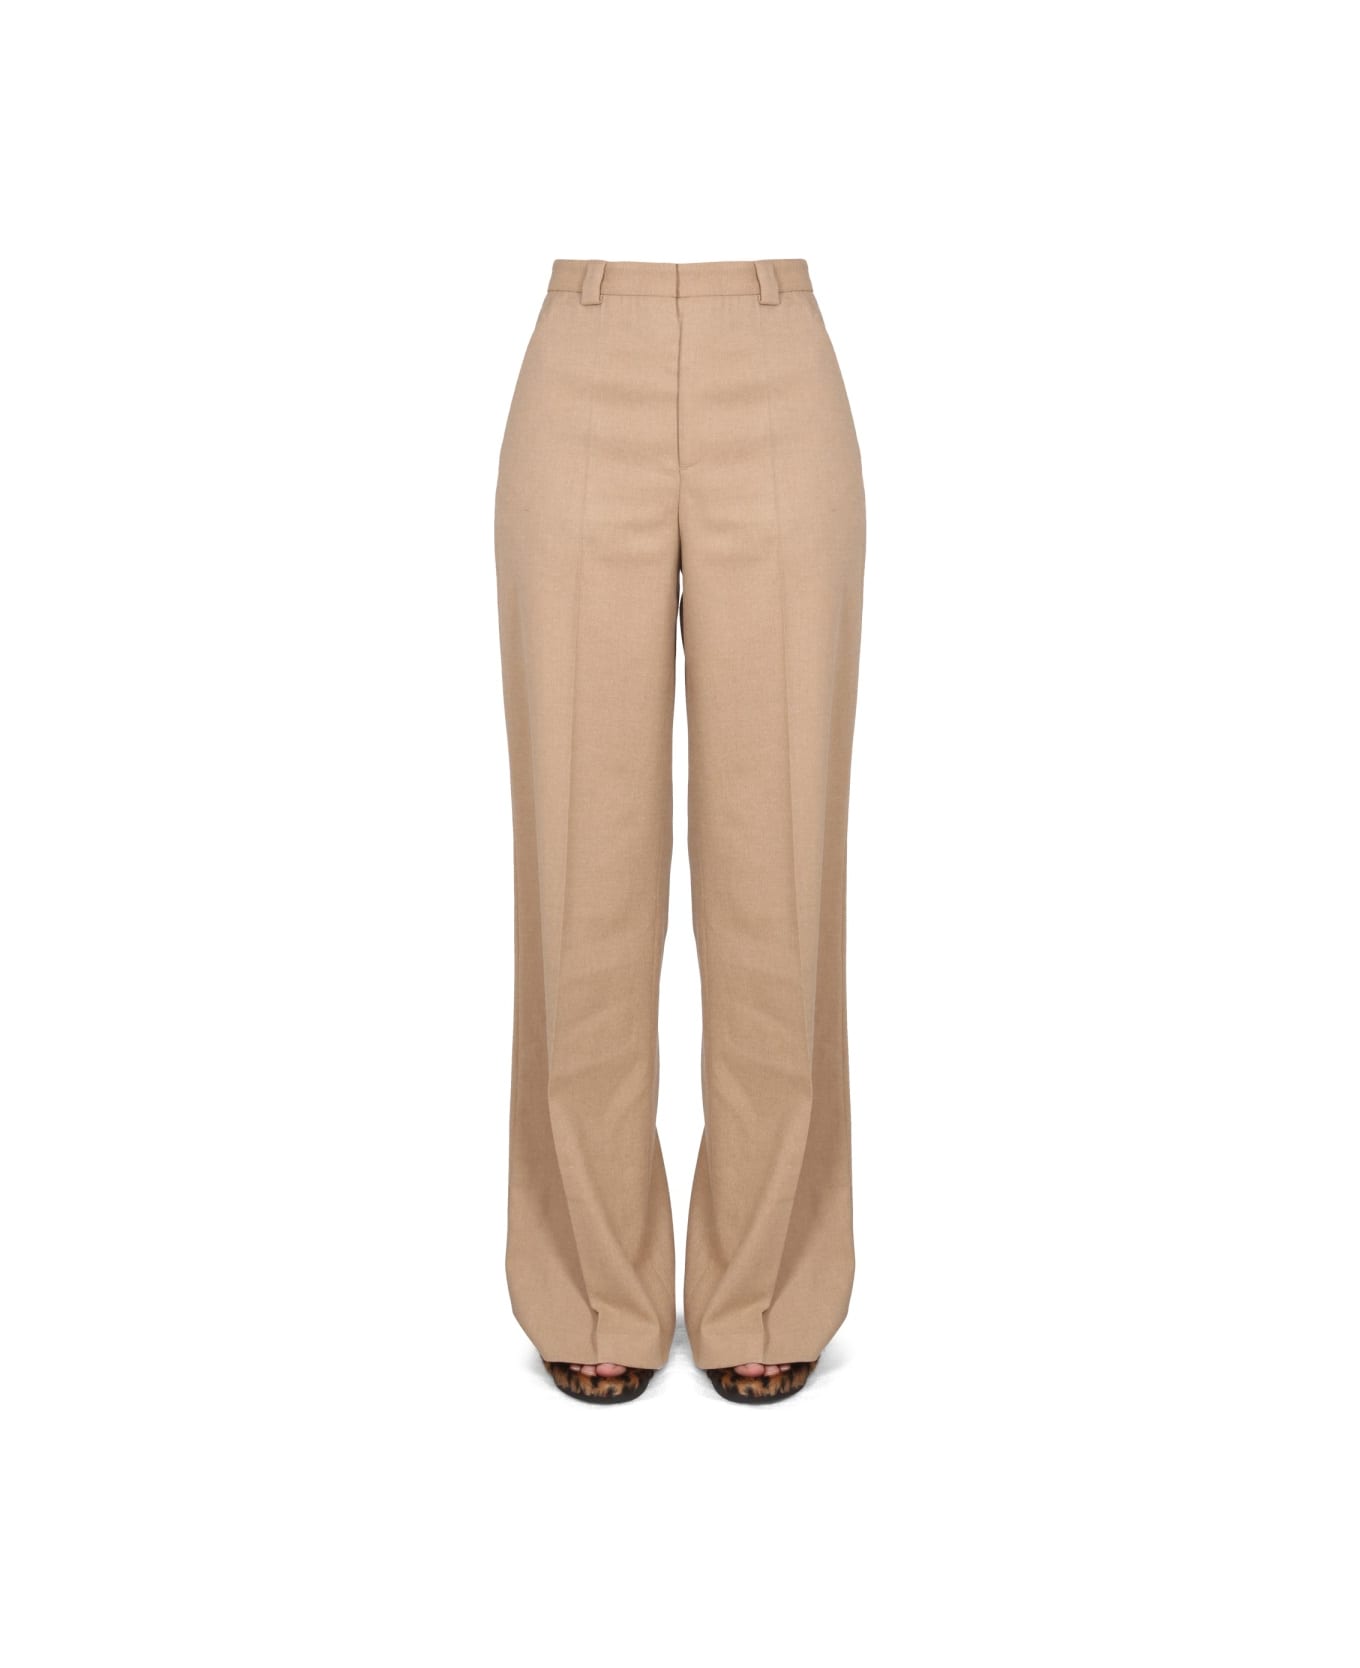 RED Valentino Flared Pants - BEIGE ボトムス